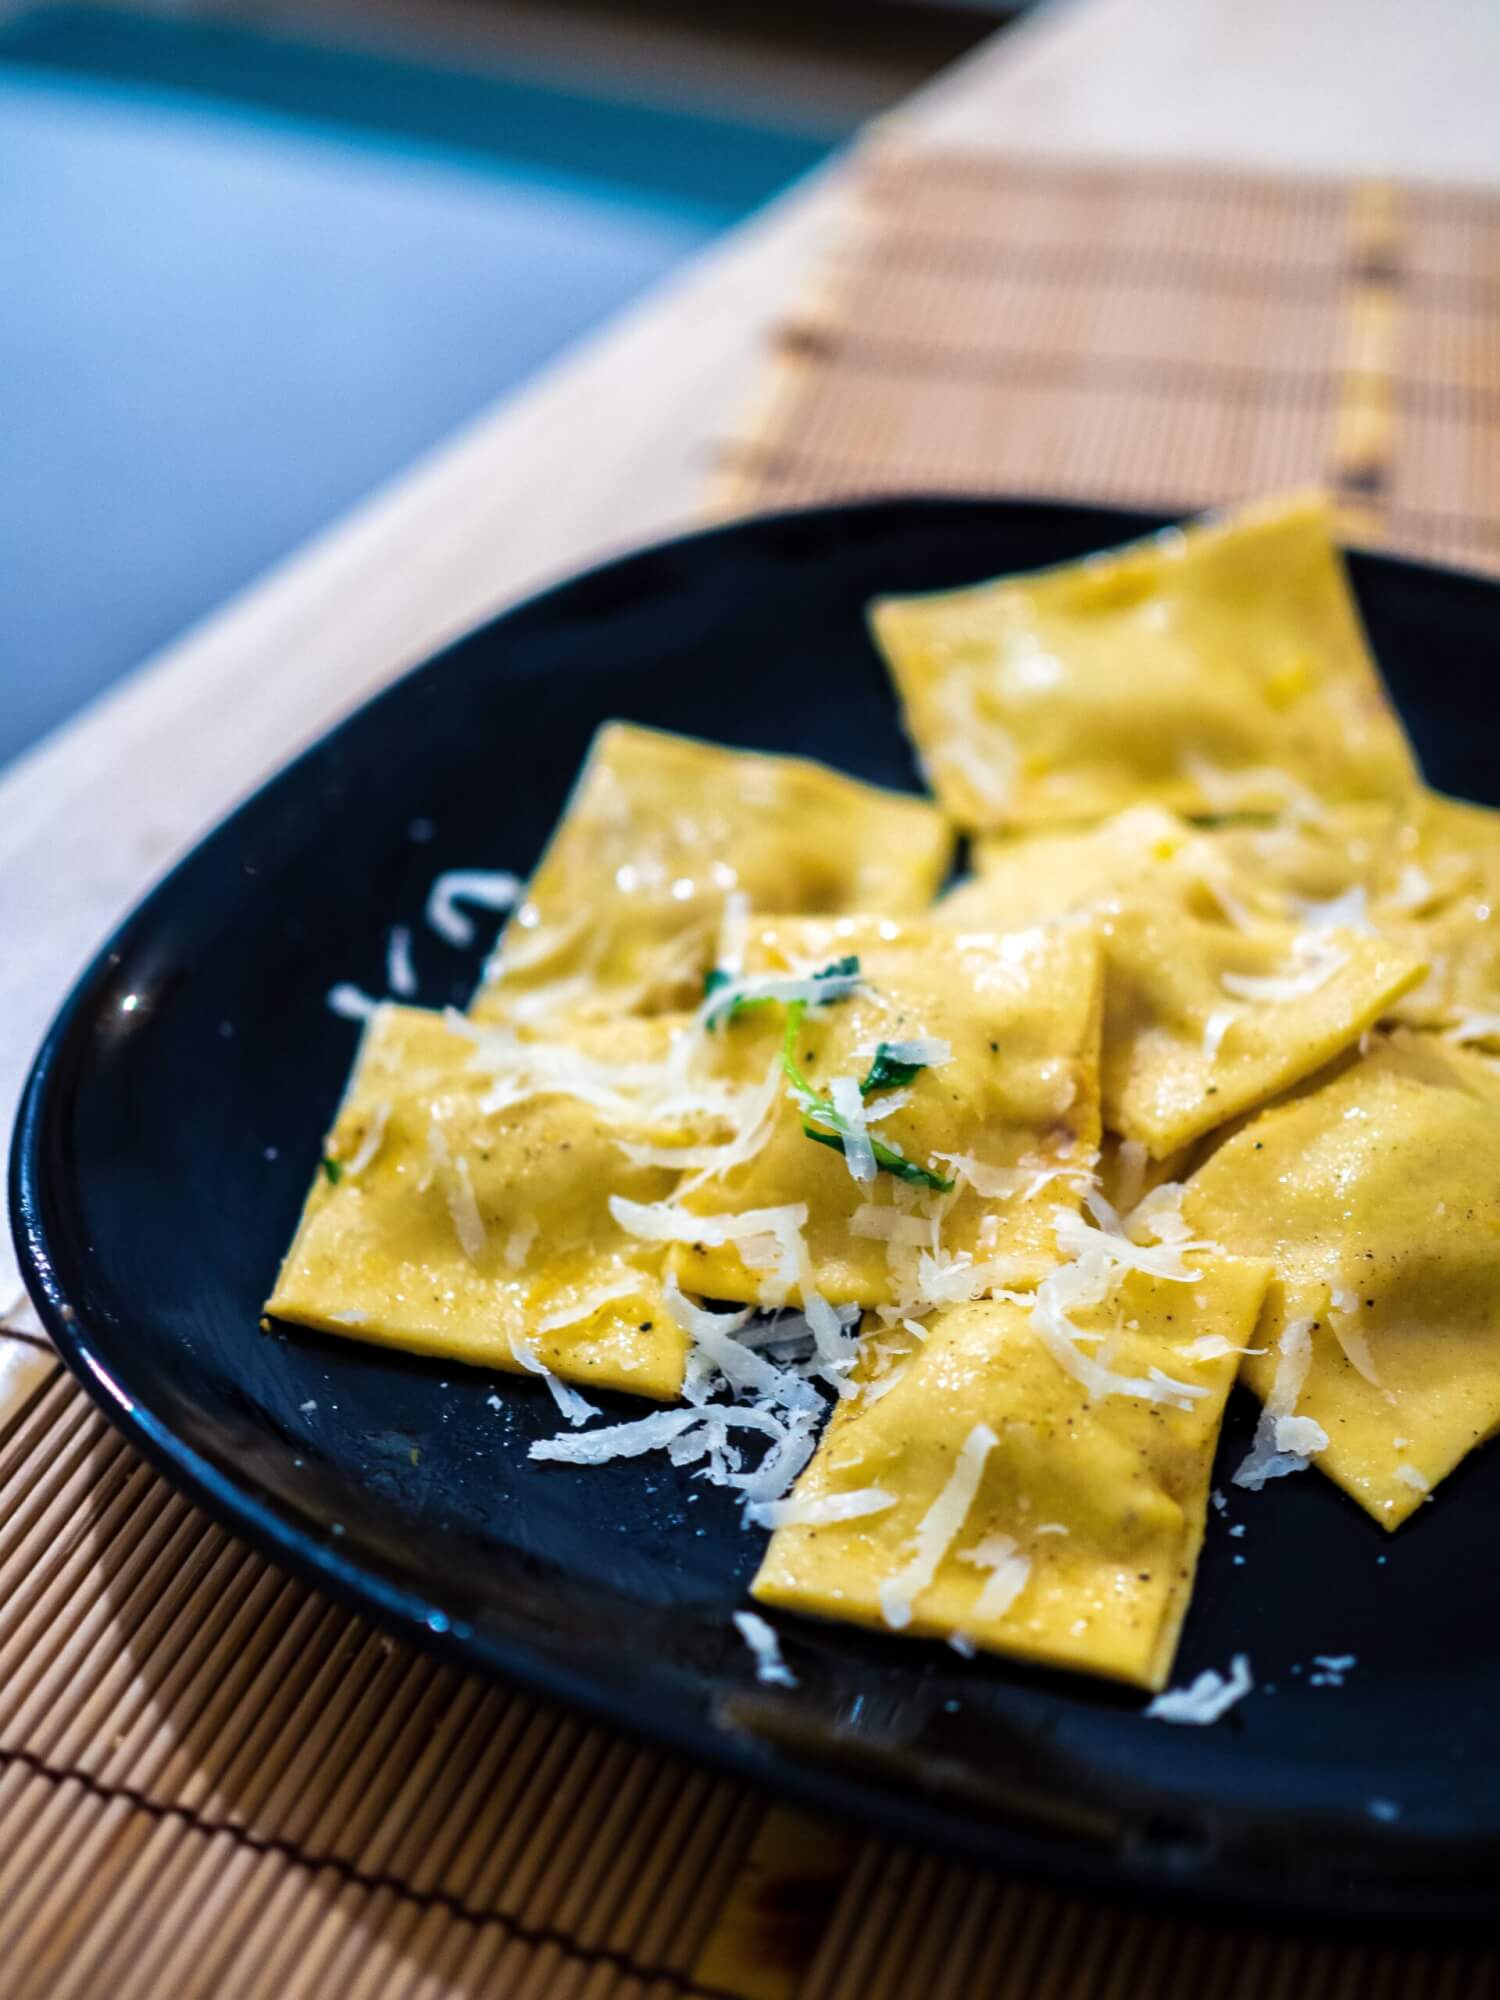 30+ Ravioli Filling Ideas &amp; Recipes You Need to Make (Tried &amp; Tested!)